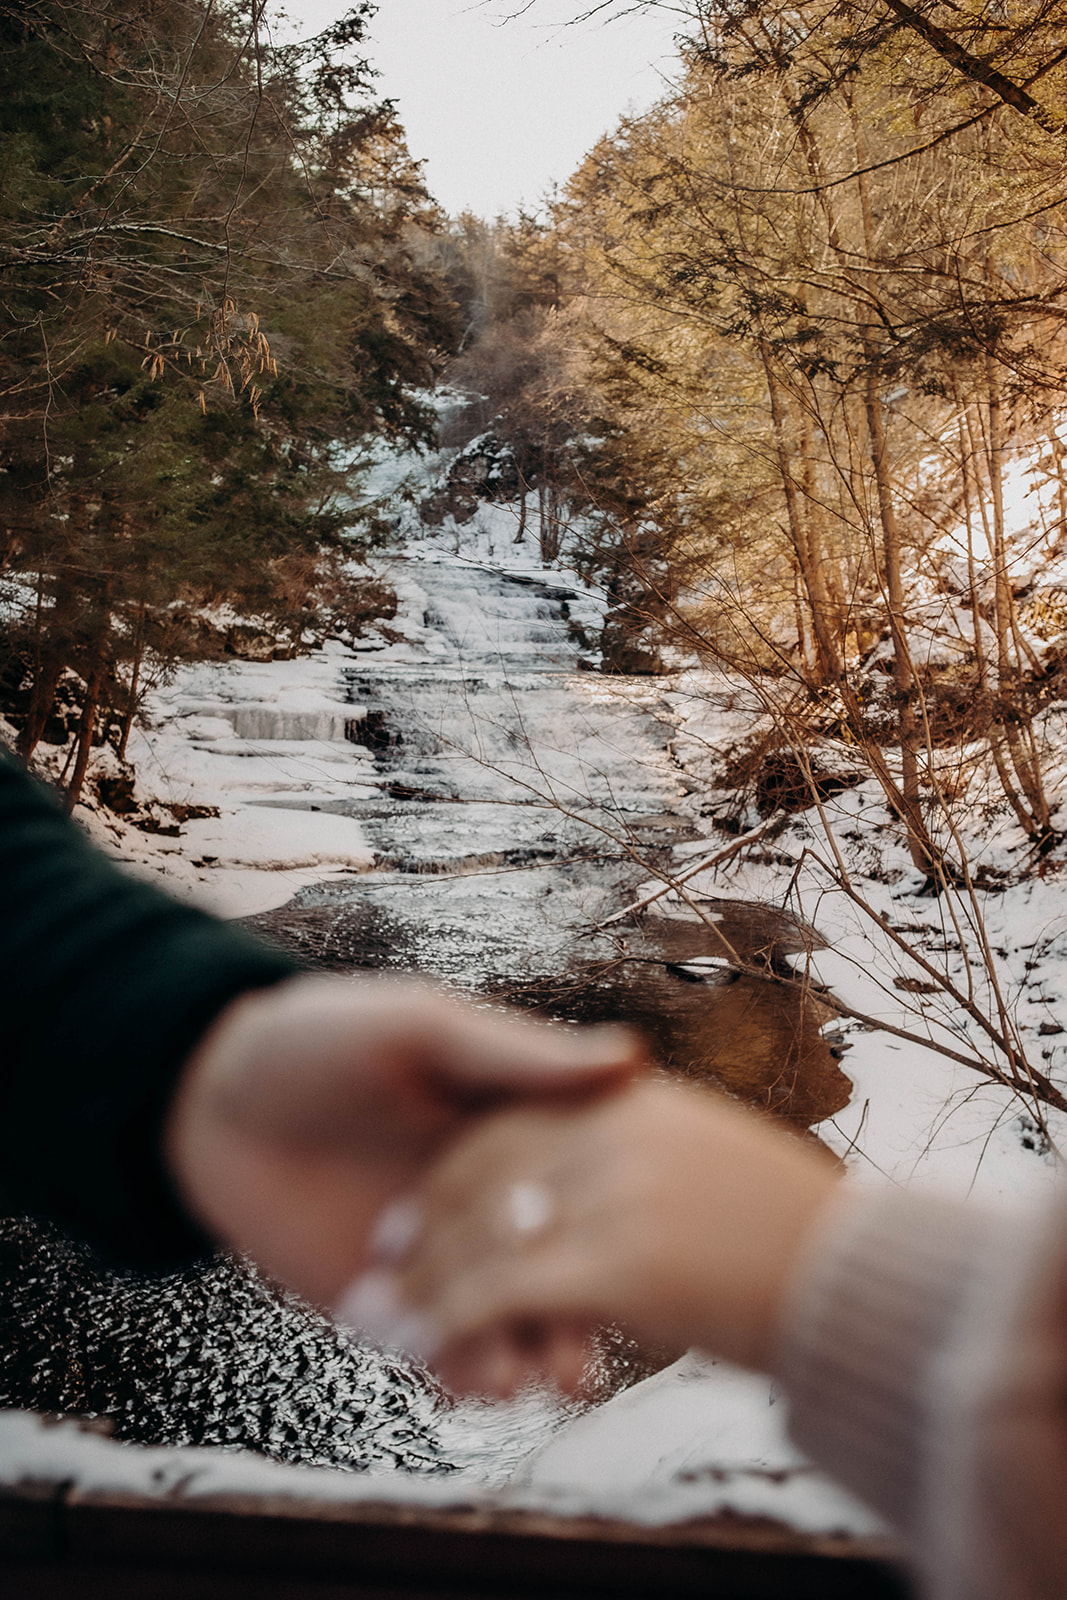 Detail shot of an engagement ring during snowy engagement photoshoot at Huyck preserve!